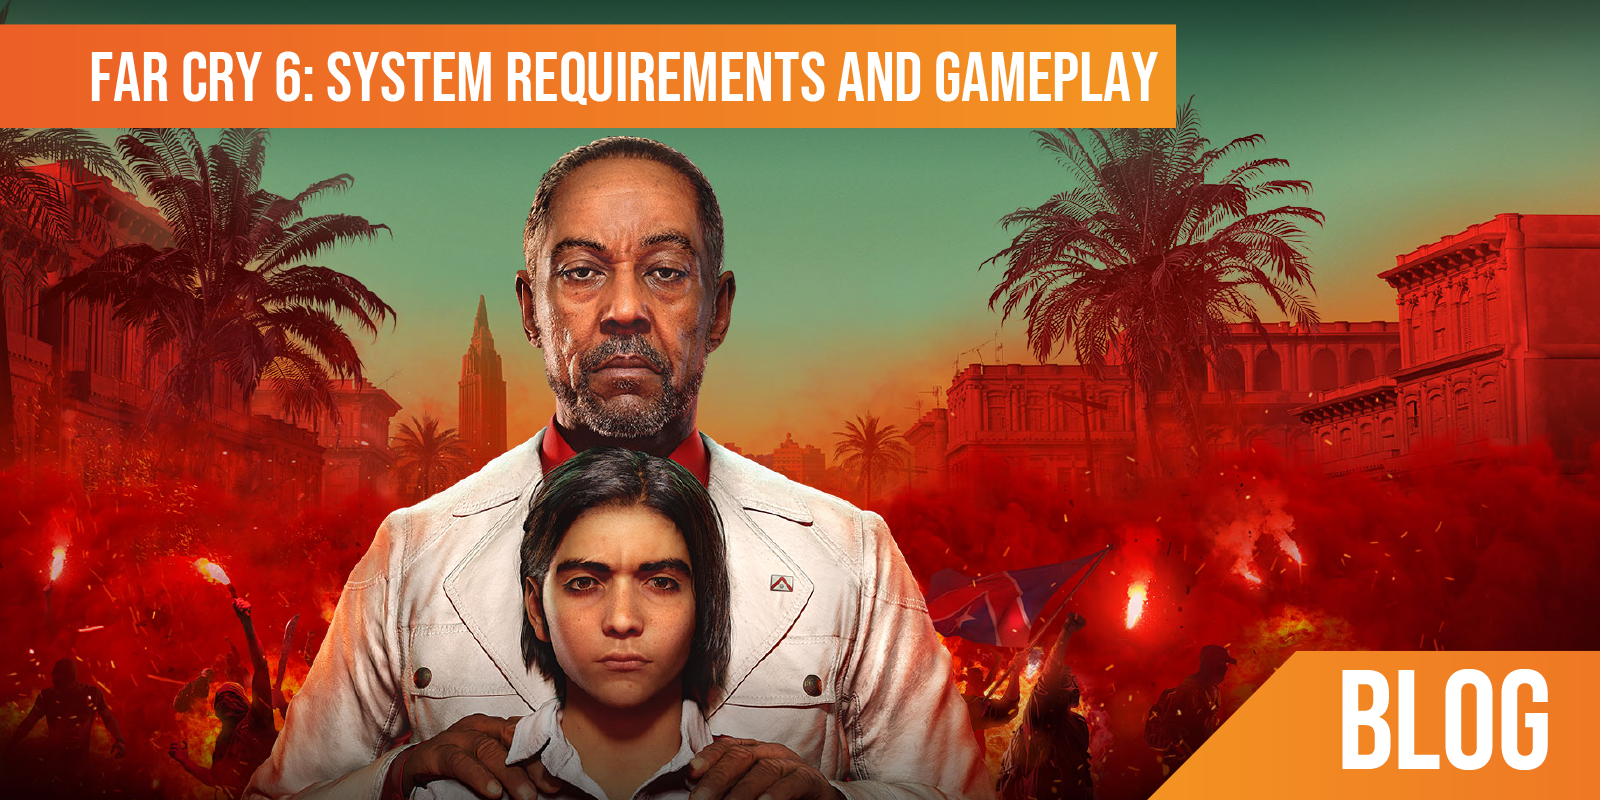 FARCRY 6: System Requirements and Gameplay - Fierce PC Blog